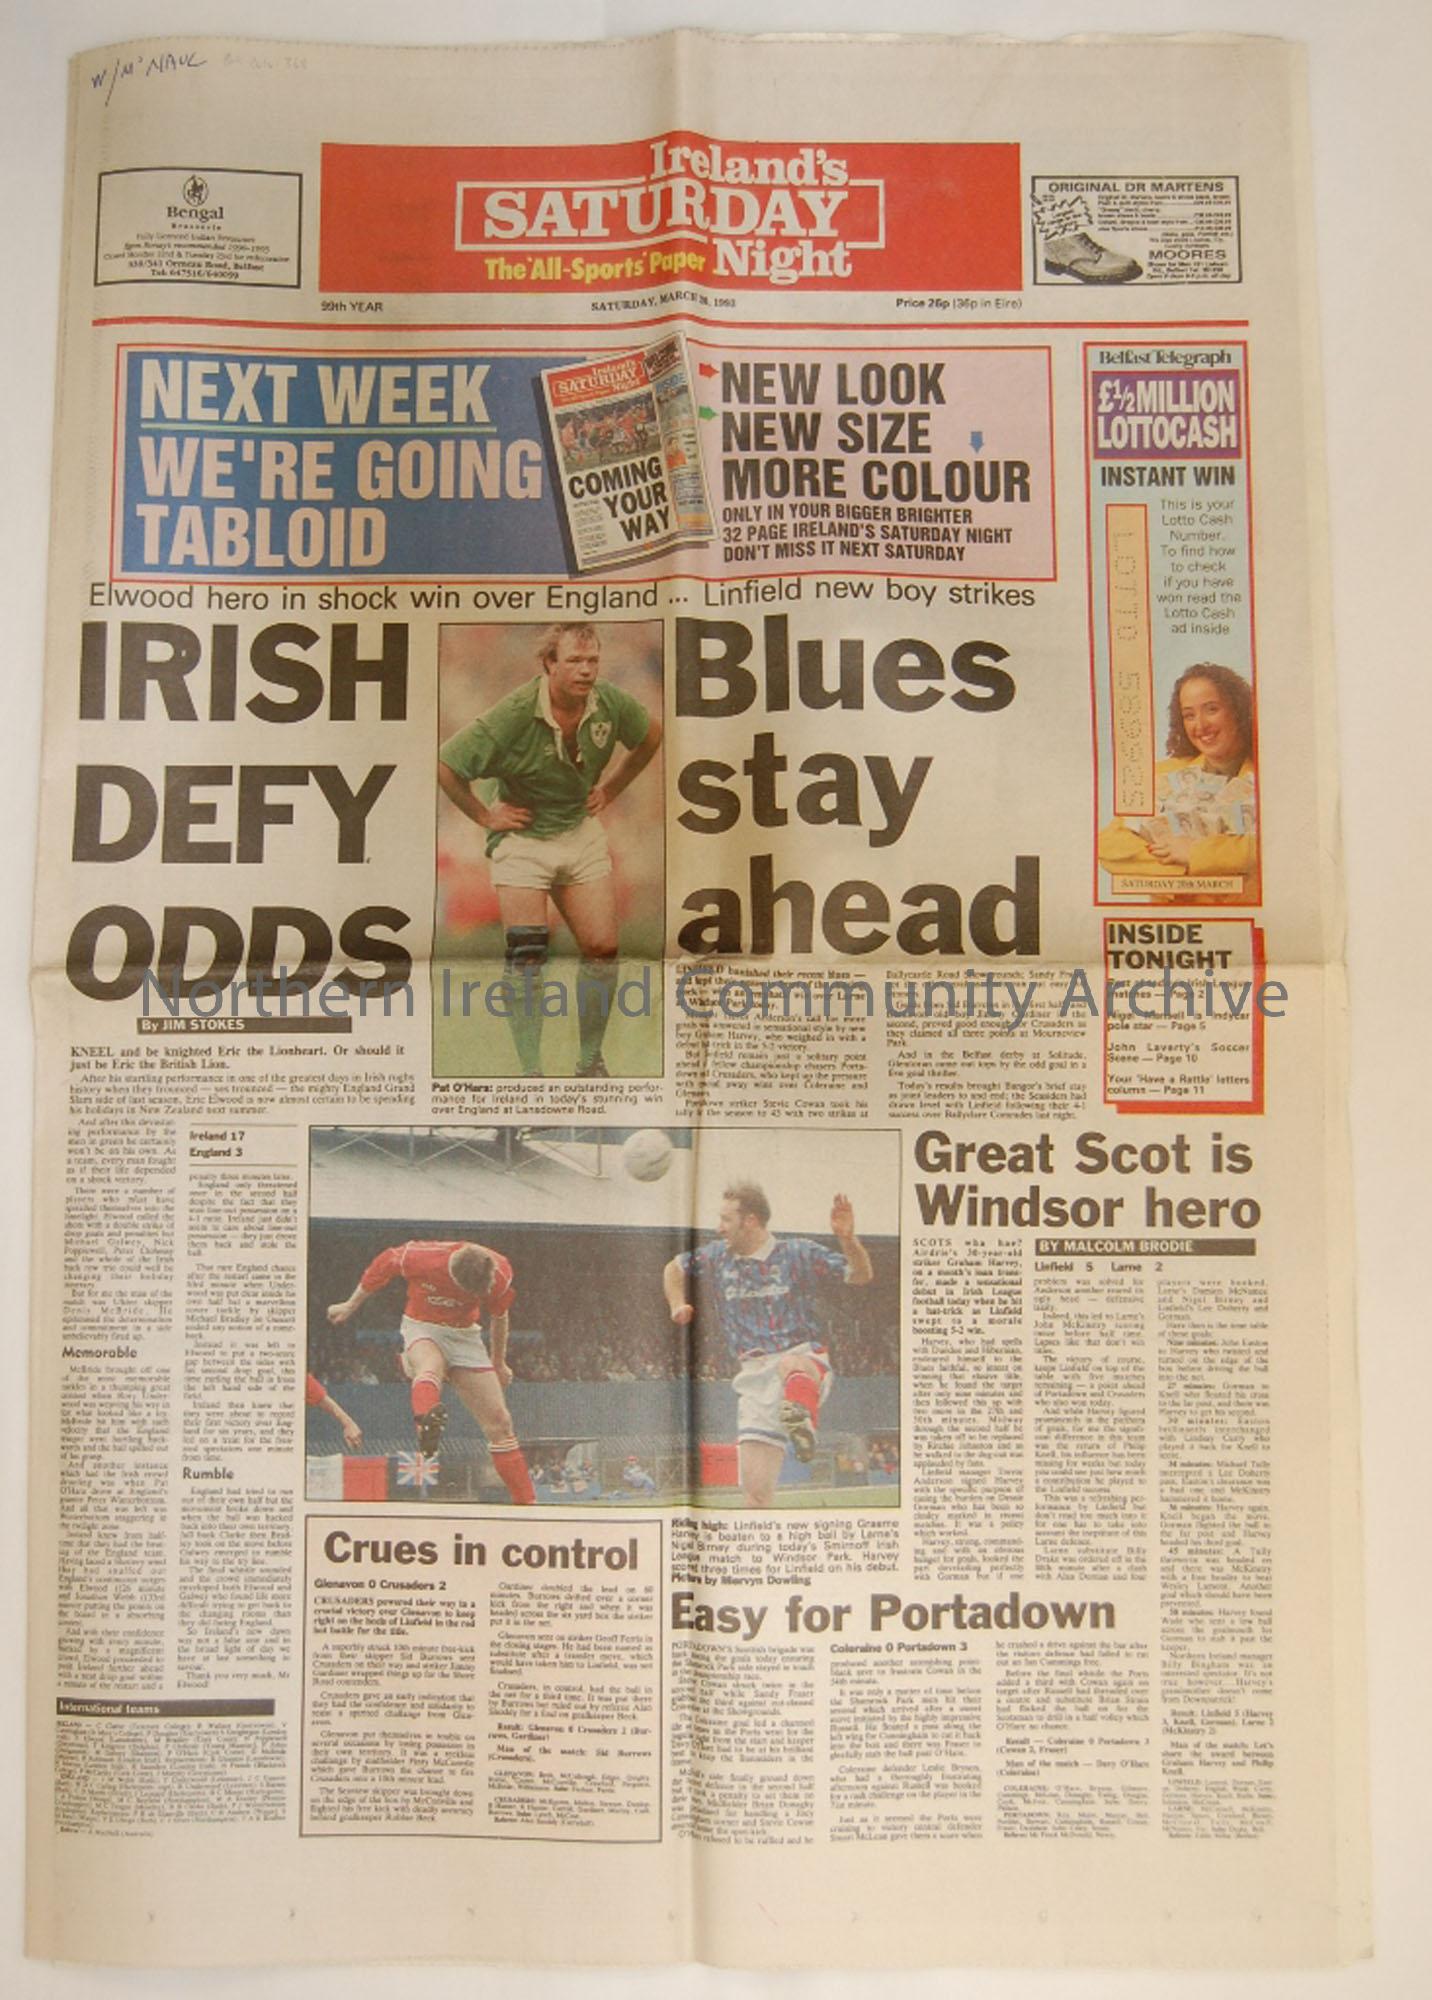 Ireland’s Saturday Night. The ‘All- sports’ paper. Saturday, March 20, 1993. Price 26p (36p in Eire)